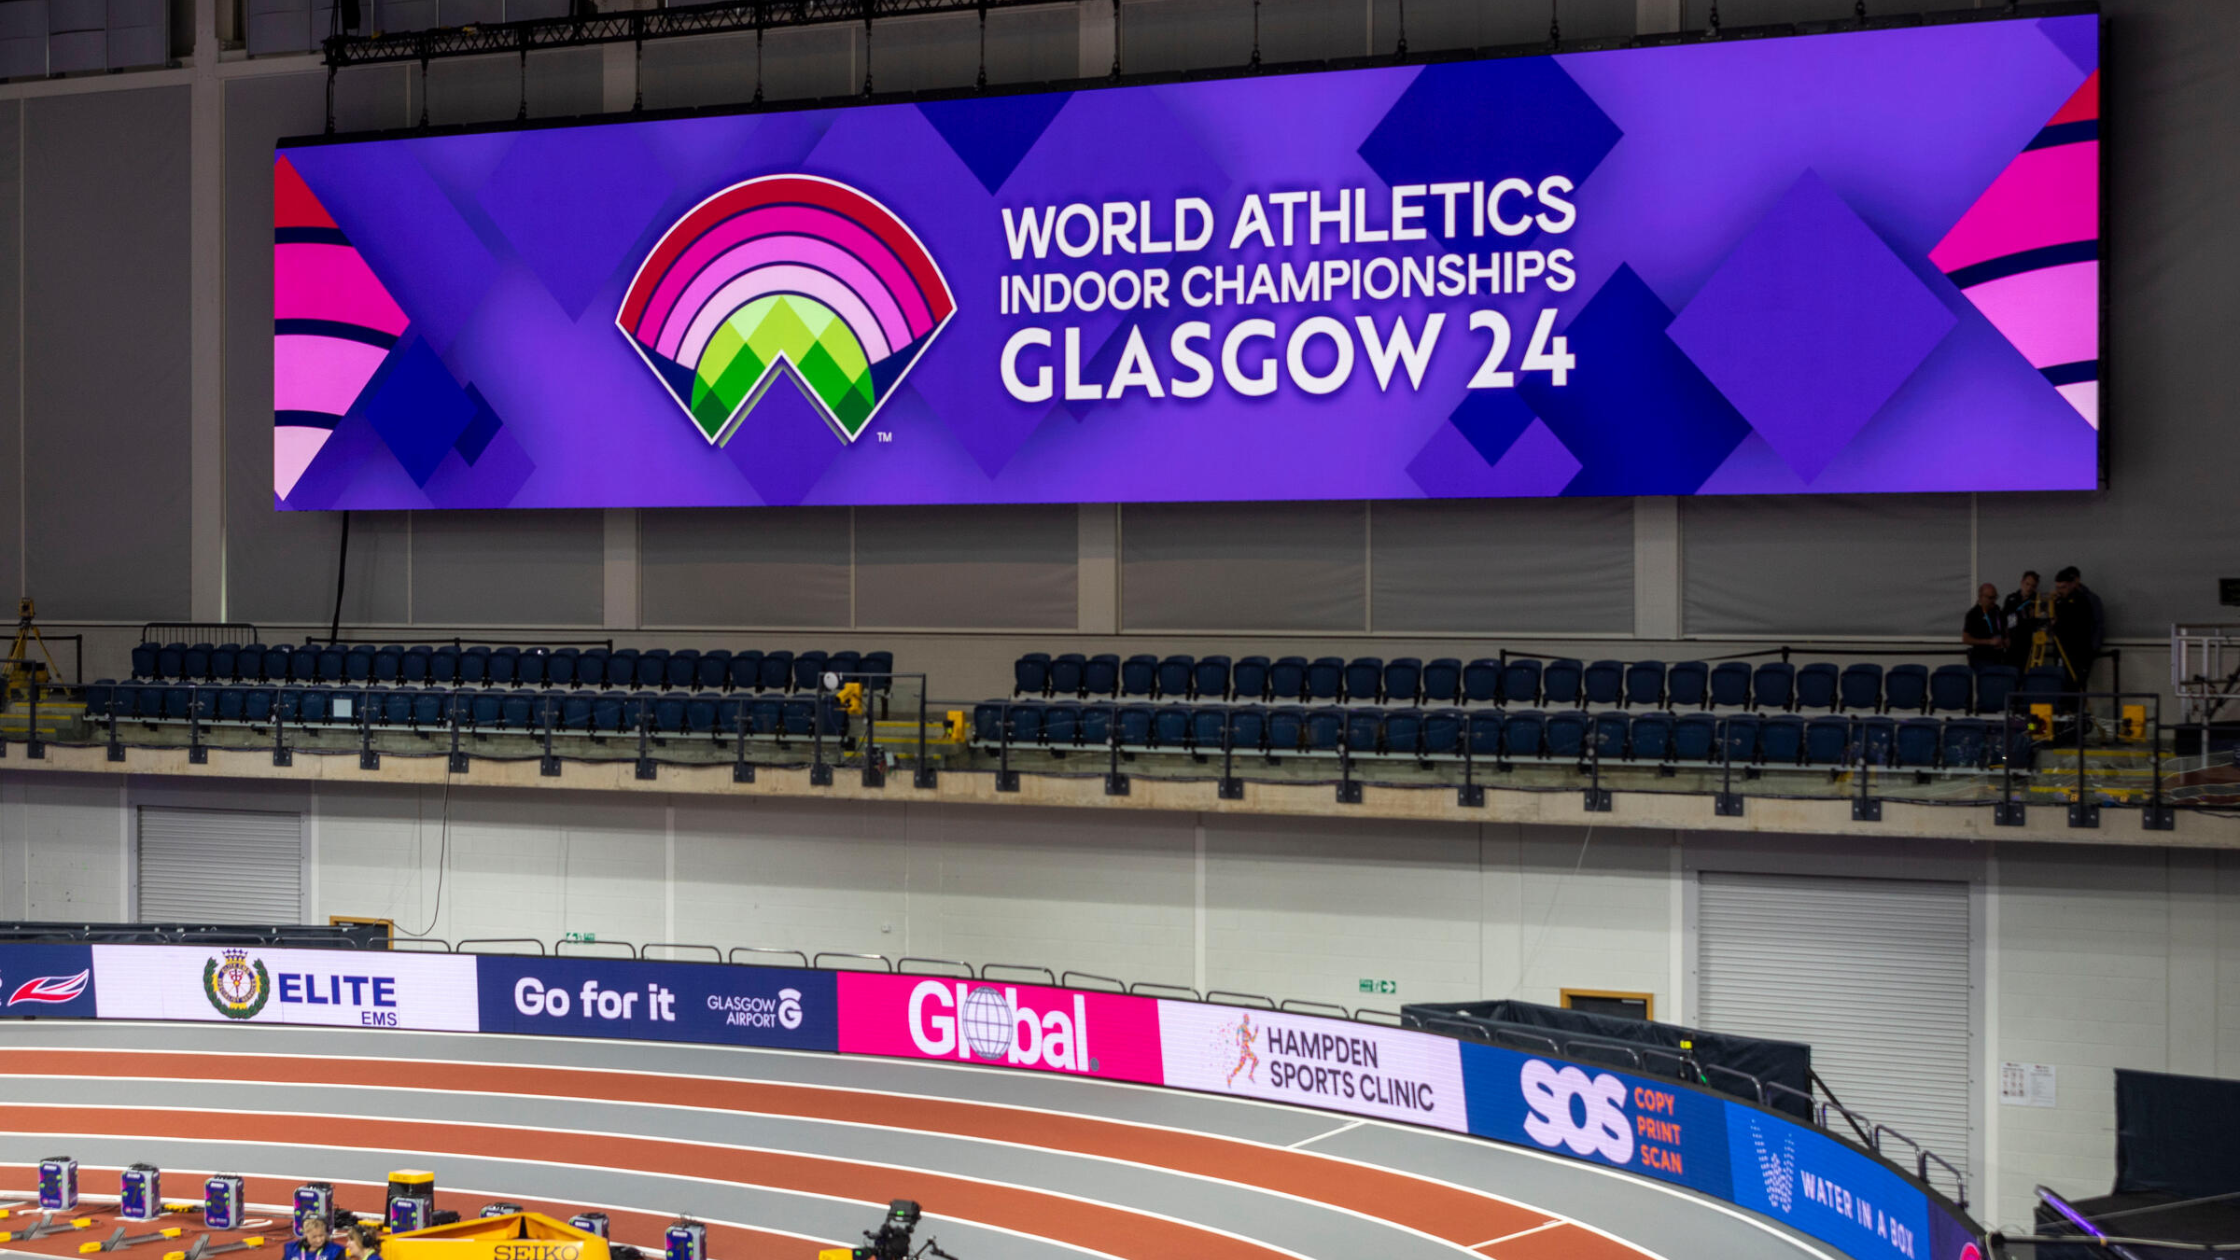 The image shows the trackside advertising of WICGlasgow24 where the SOS logo can be seen circulating the track